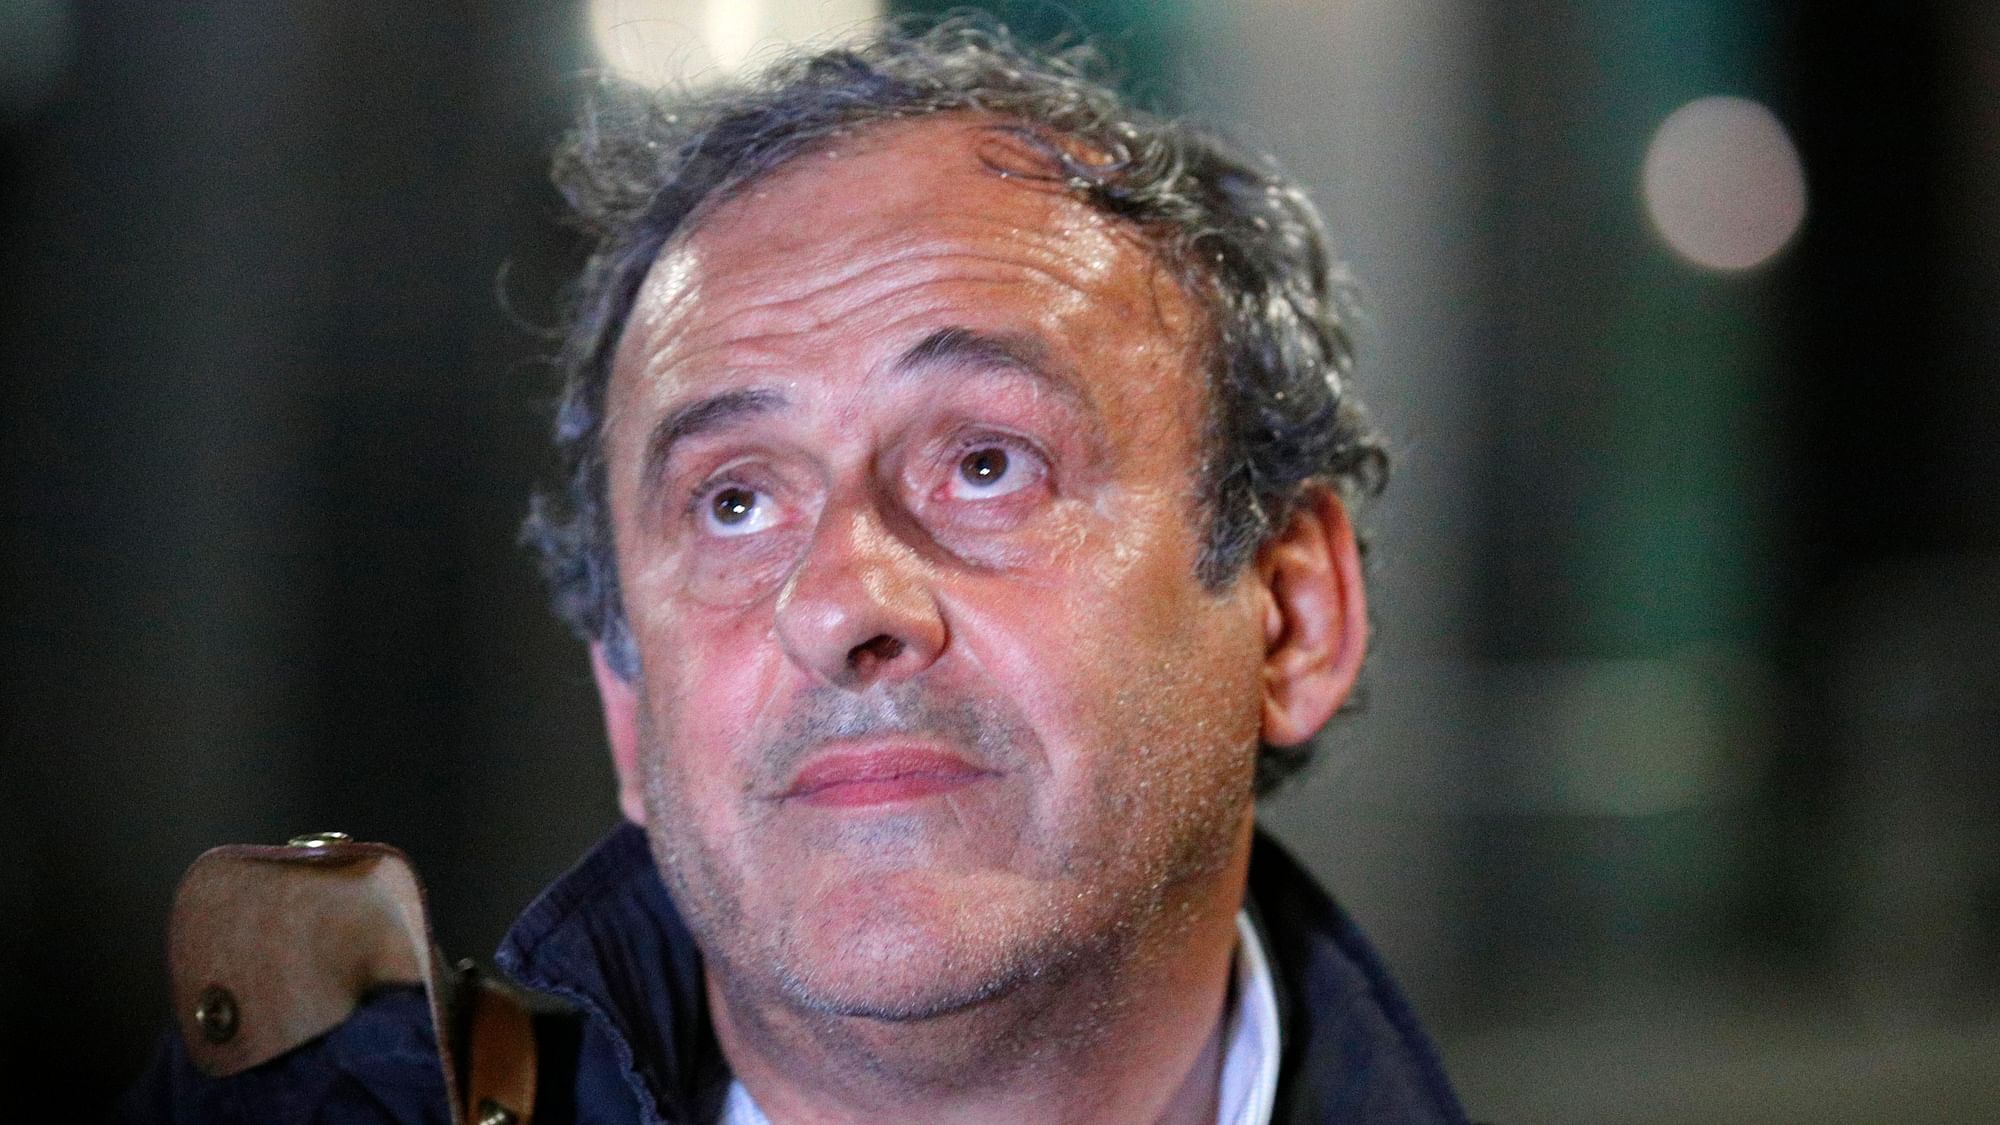 Michel Platini looks up after being freed, outside the French police anti-corruption and financial crimes office in Nanterre.